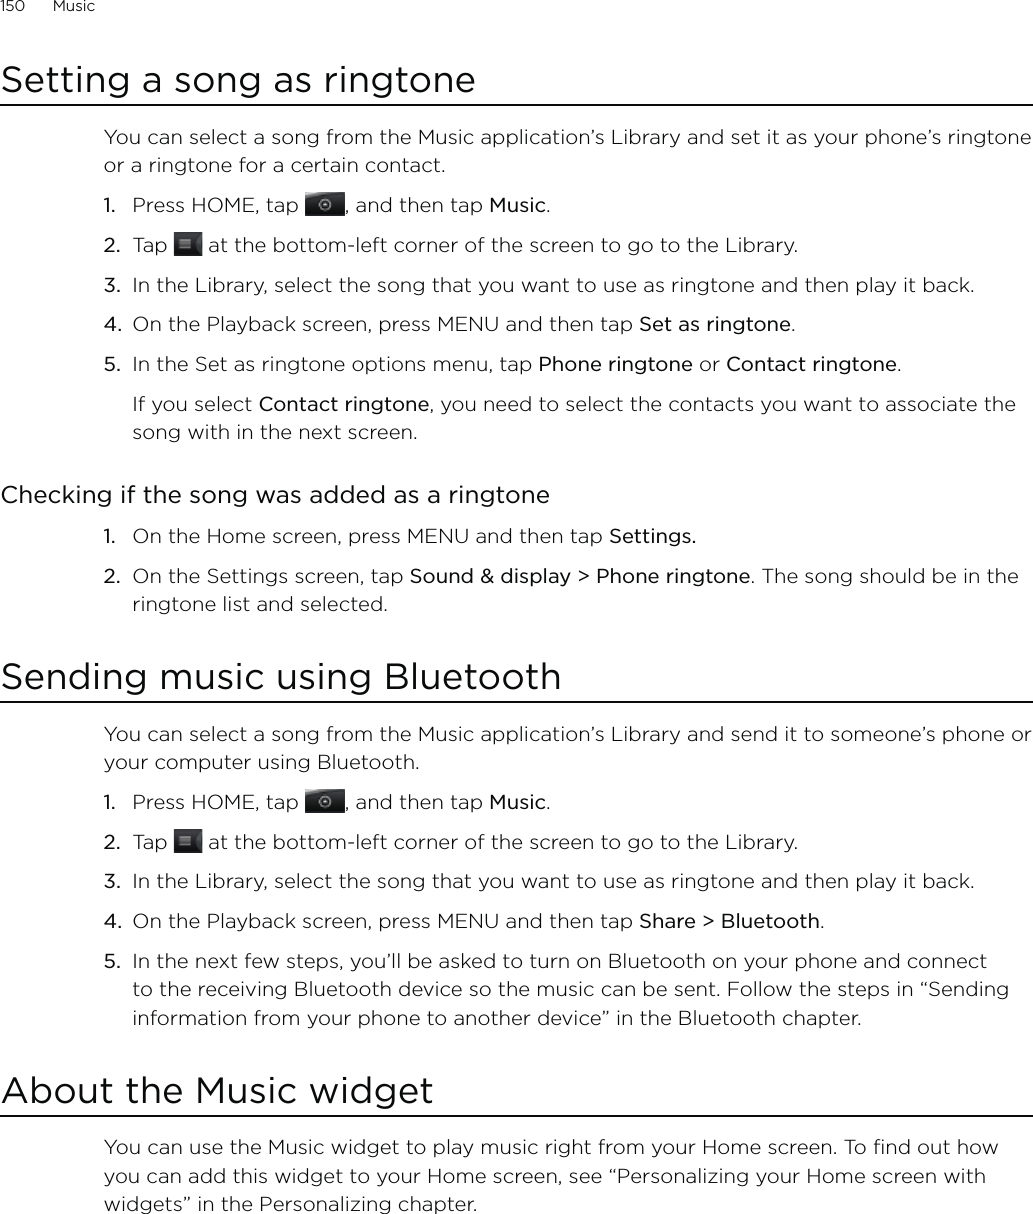 150      Music      Setting a song as ringtoneYou can select a song from the Music application’s Library and set it as your phone’s ringtone or a ringtone for a certain contact.Press HOME, tap , and then tap Music.Tap   at the bottom-left corner of the screen to go to the Library.In the Library, select the song that you want to use as ringtone and then play it back.On the Playback screen, press MENU and then tap Set as ringtone.In the Set as ringtone options menu, tap Phone ringtone or Contact ringtone.If you select Contact ringtone, you need to select the contacts you want to associate the song with in the next screen.Checking if the song was added as a ringtoneOn the Home screen, press MENU and then tap Settings.On the Settings screen, tap Sound &amp; display &gt; Phone ringtone. The song should be in the ringtone list and selected. Sending music using BluetoothYou can select a song from the Music application’s Library and send it to someone’s phone or your computer using Bluetooth.Press HOME, tap , and then tap Music.Tap   at the bottom-left corner of the screen to go to the Library.In the Library, select the song that you want to use as ringtone and then play it back.On the Playback screen, press MENU and then tap Share &gt; Bluetooth.In the next few steps, you’ll be asked to turn on Bluetooth on your phone and connect to the receiving Bluetooth device so the music can be sent. Follow the steps in “Sending information from your phone to another device” in the Bluetooth chapter.About the Music widgetYou can use the Music widget to play music right from your Home screen. To find out how you can add this widget to your Home screen, see “Personalizing your Home screen with widgets” in the Personalizing chapter.1.2.3.4.5.1.2.1.2.3.4.5.